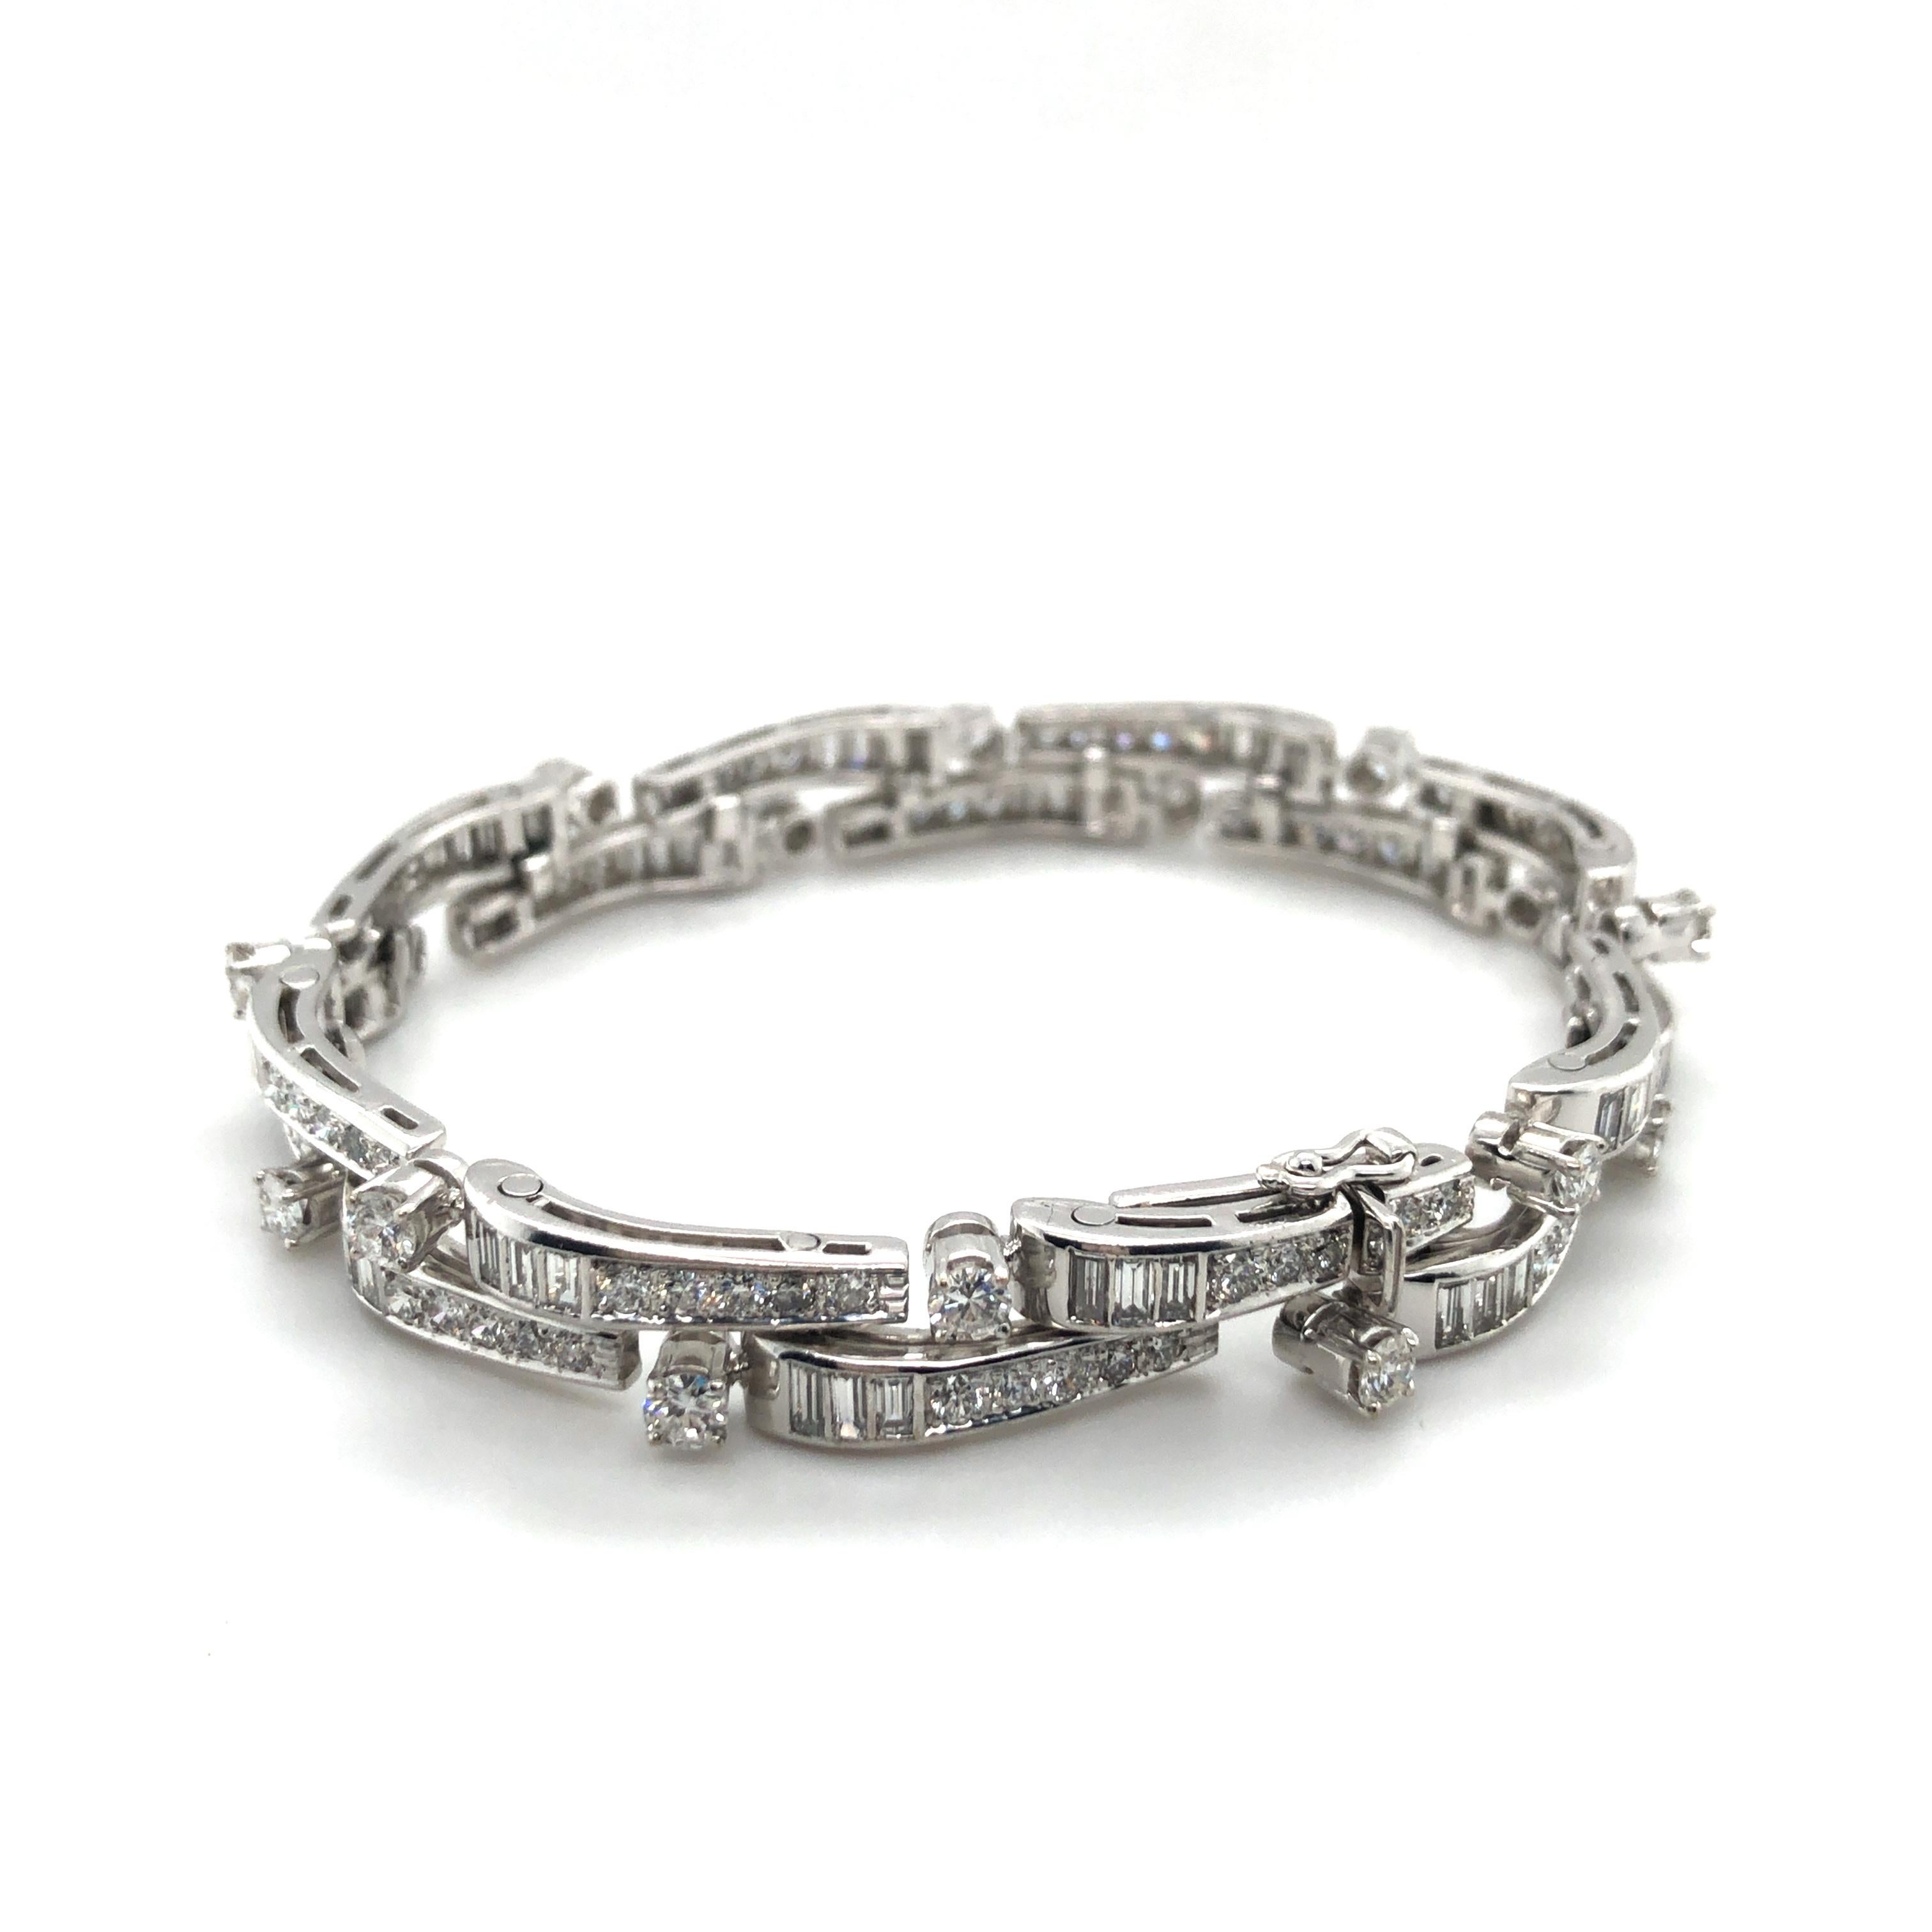 Simply stunning, our diamond bracelet has a magnificent shine from round and baguette-cut diamonds, which are set in 18K white gold. 
48 baguette-cut diamonds totalling approximately 2.40 ct and 96 brilliant-cut diamonds with a total weight of